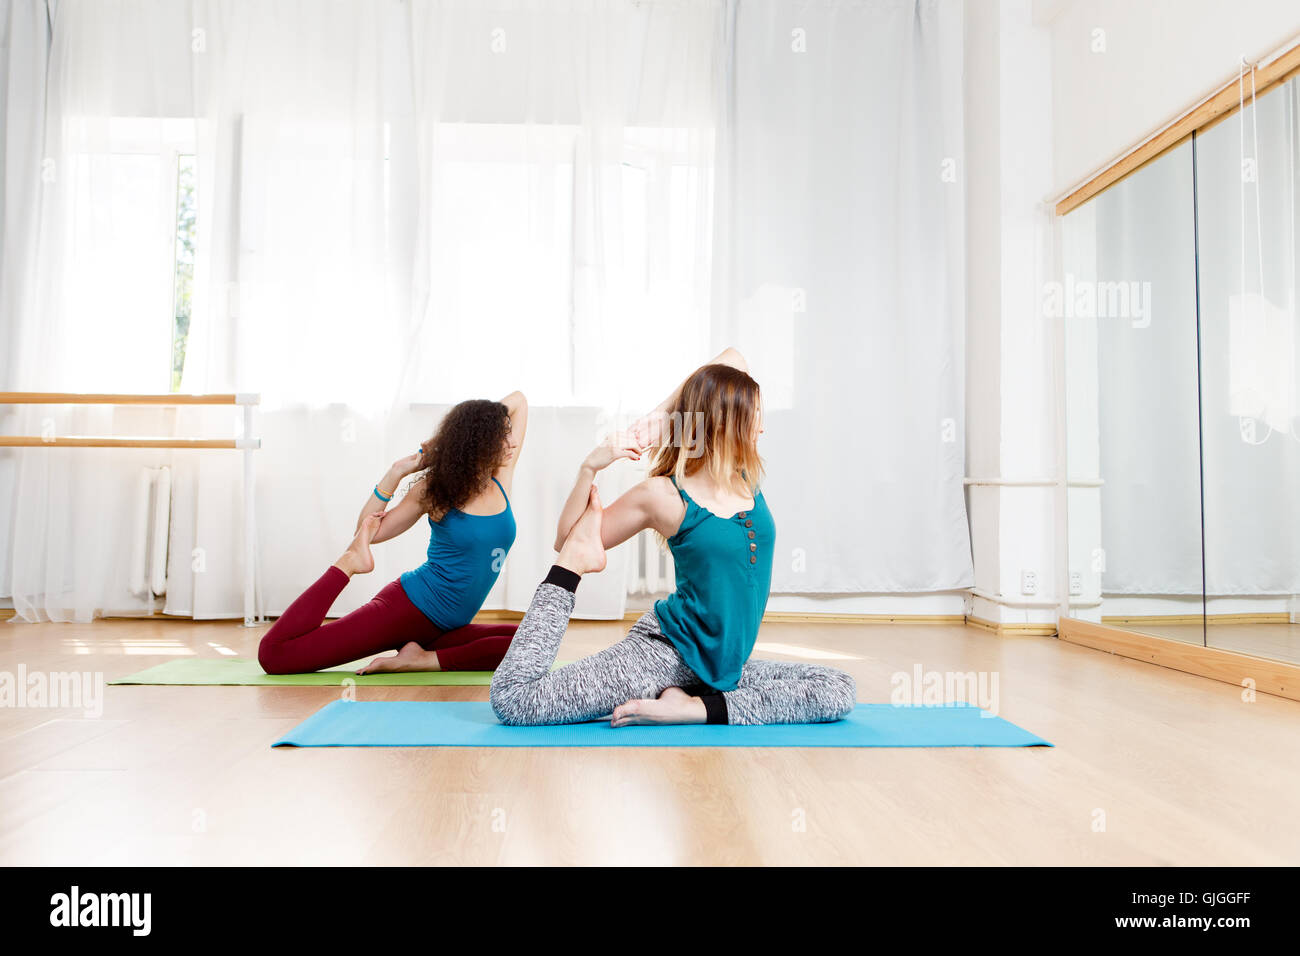 Side view portrait of two young women practice pigeon pose Stock Photo